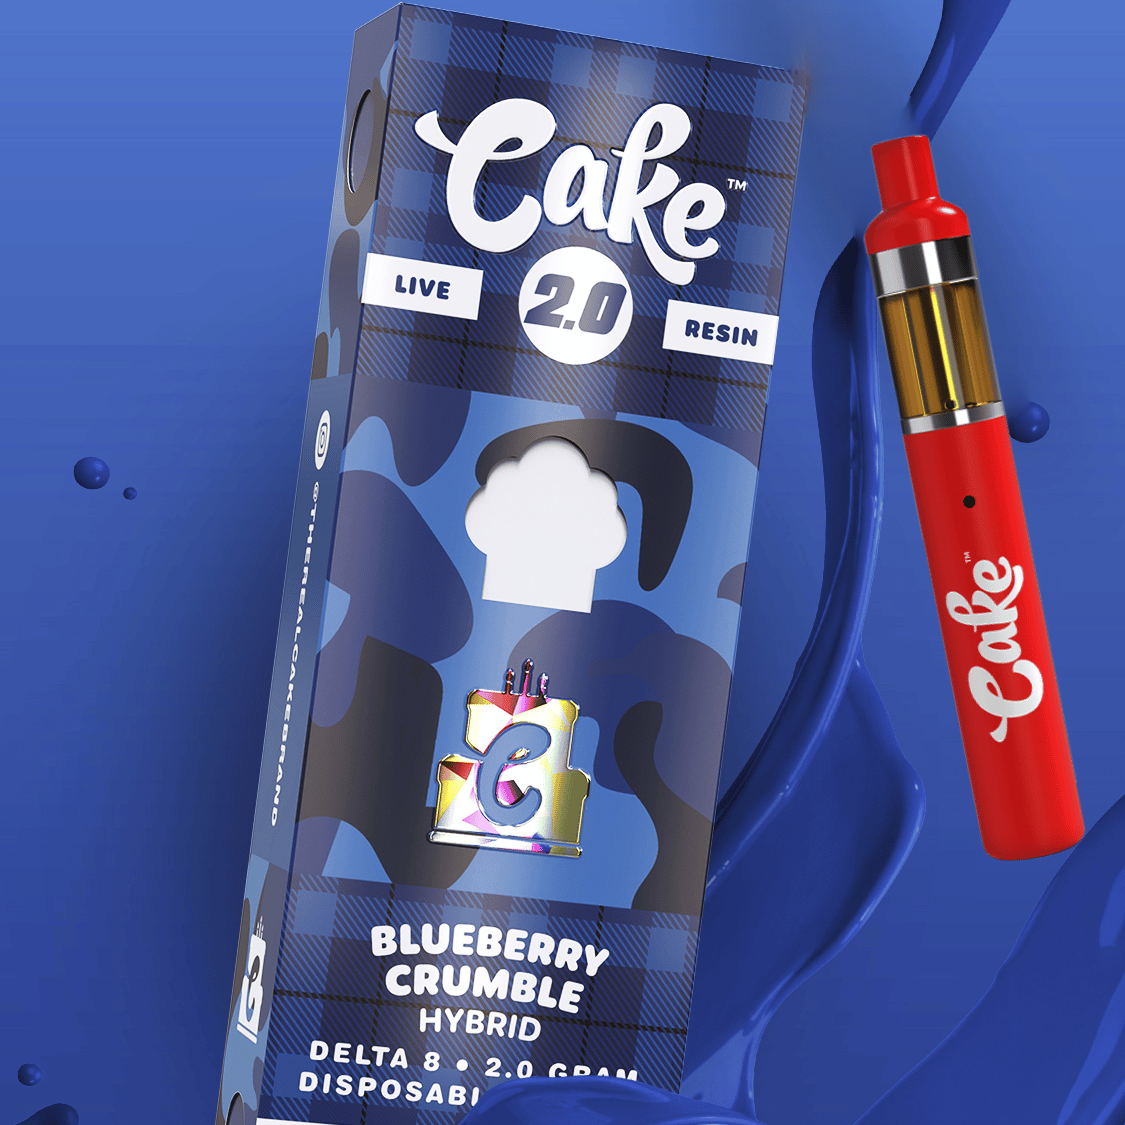 Trying Cake Delta 8 For The First Time? Everything You Need To Know